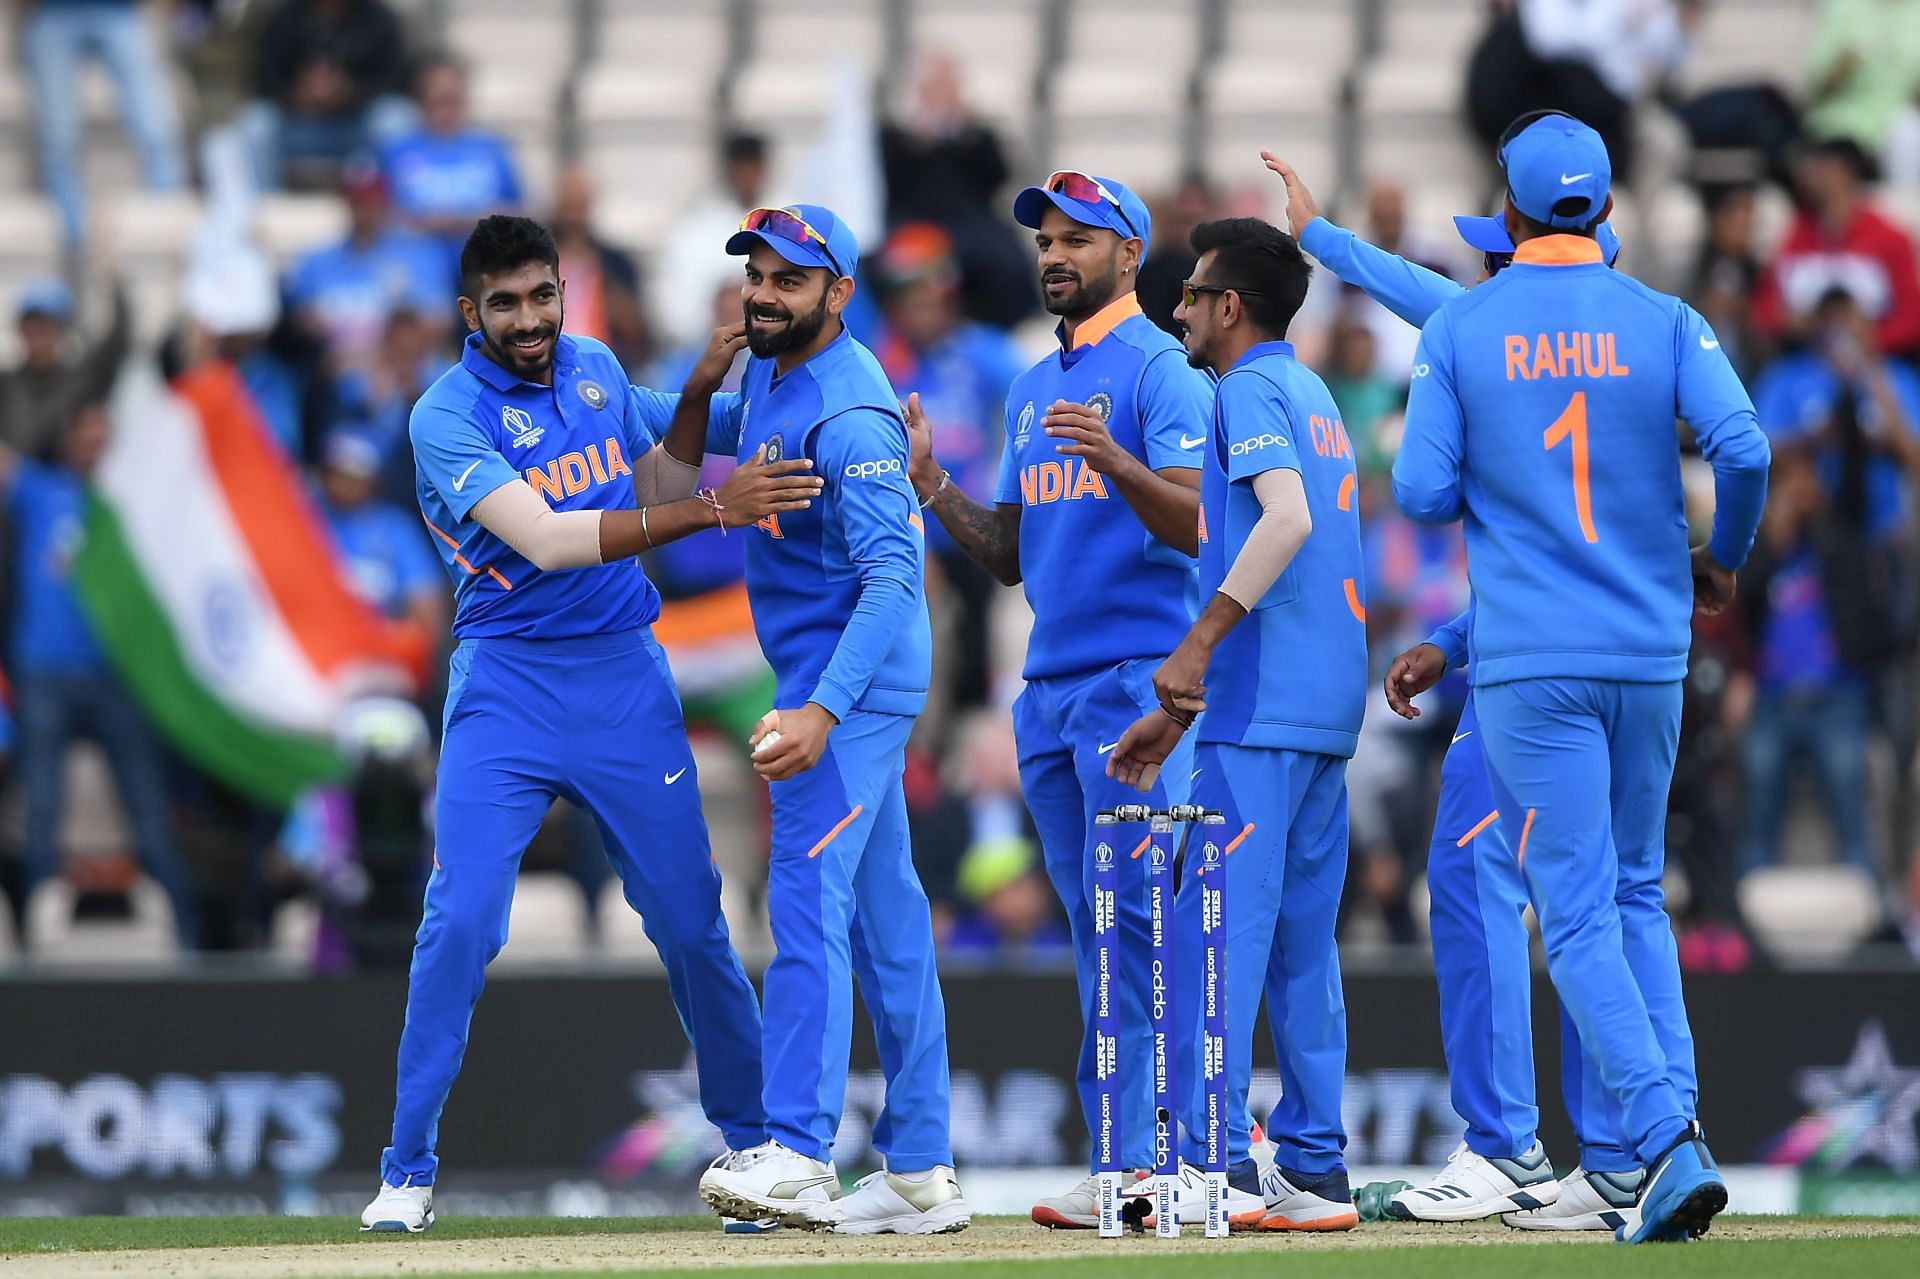 Many players made their debut for India in 2021